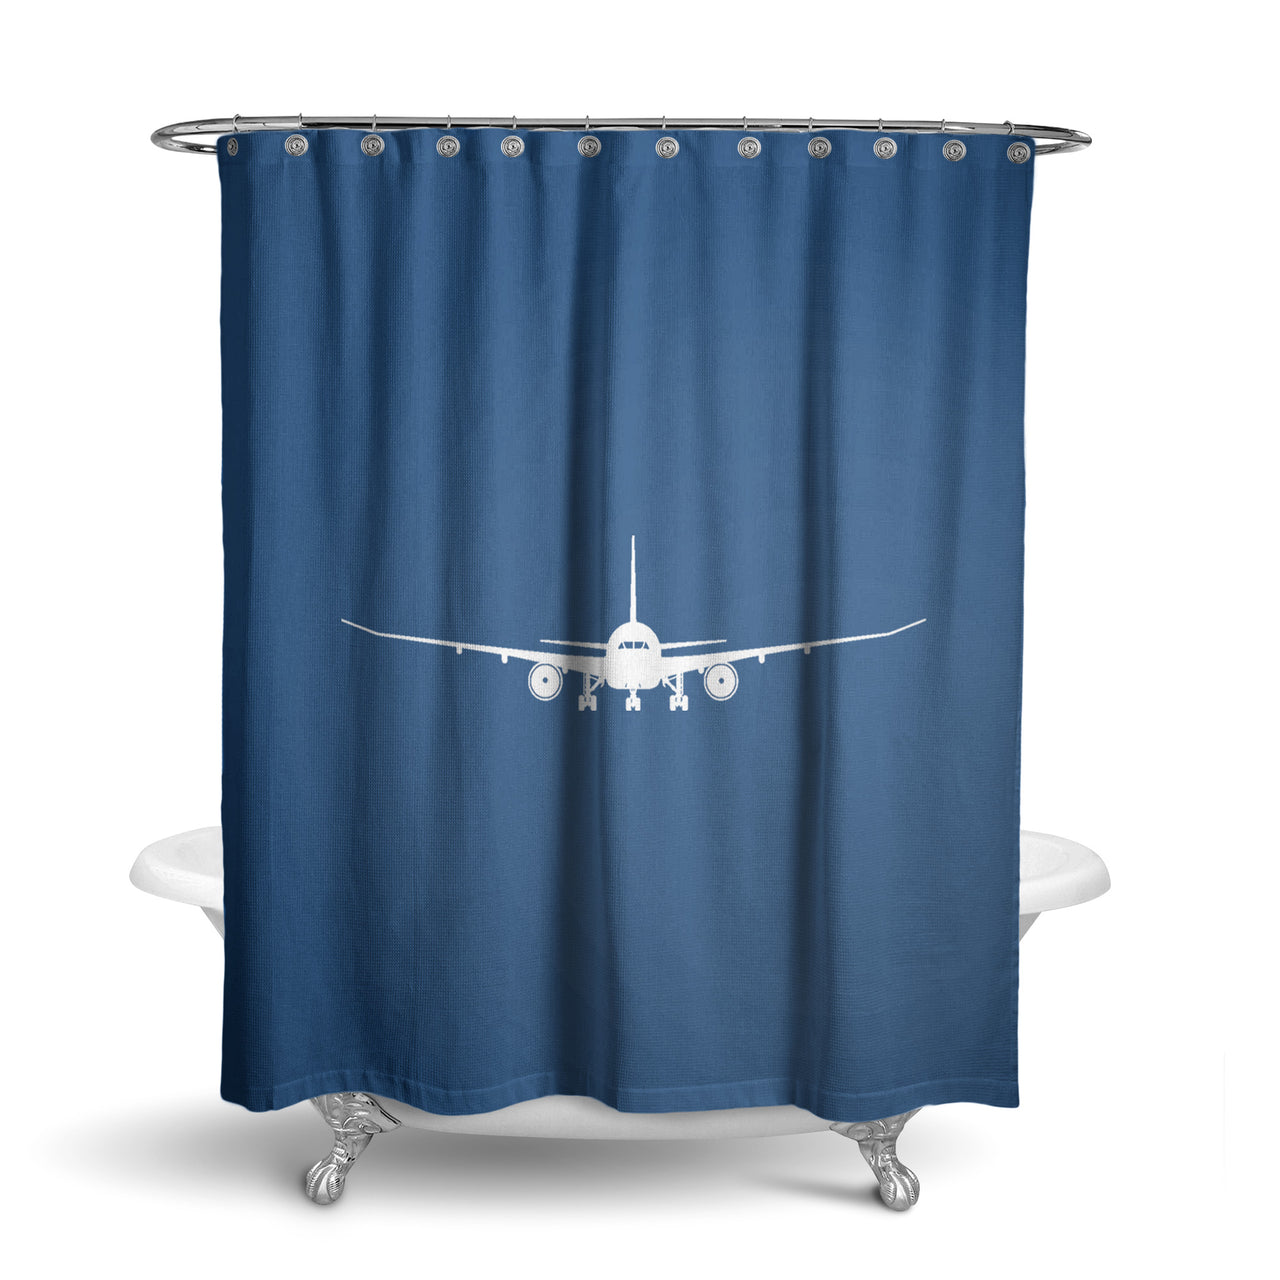 Boeing 787 Silhouette Designed Shower Curtains